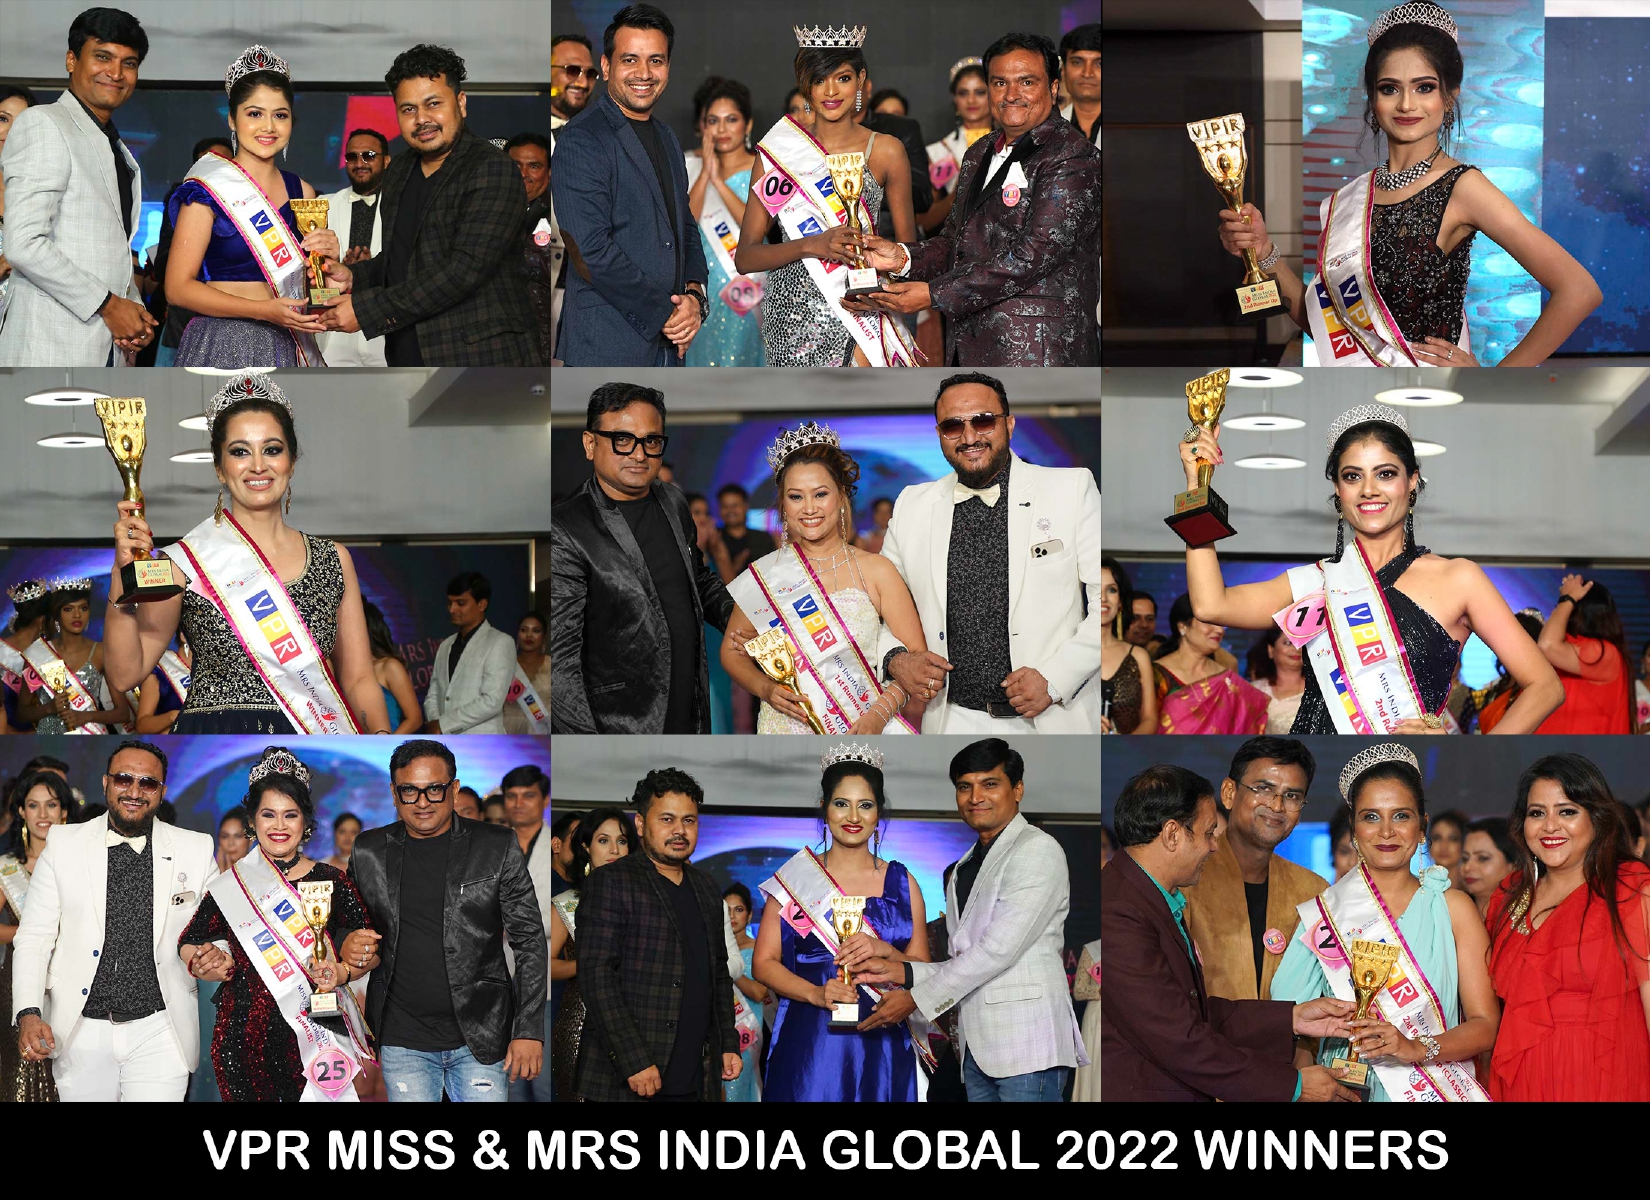 VPR entertainment shakes the beauty pageant industry with glamour filled event in Goa